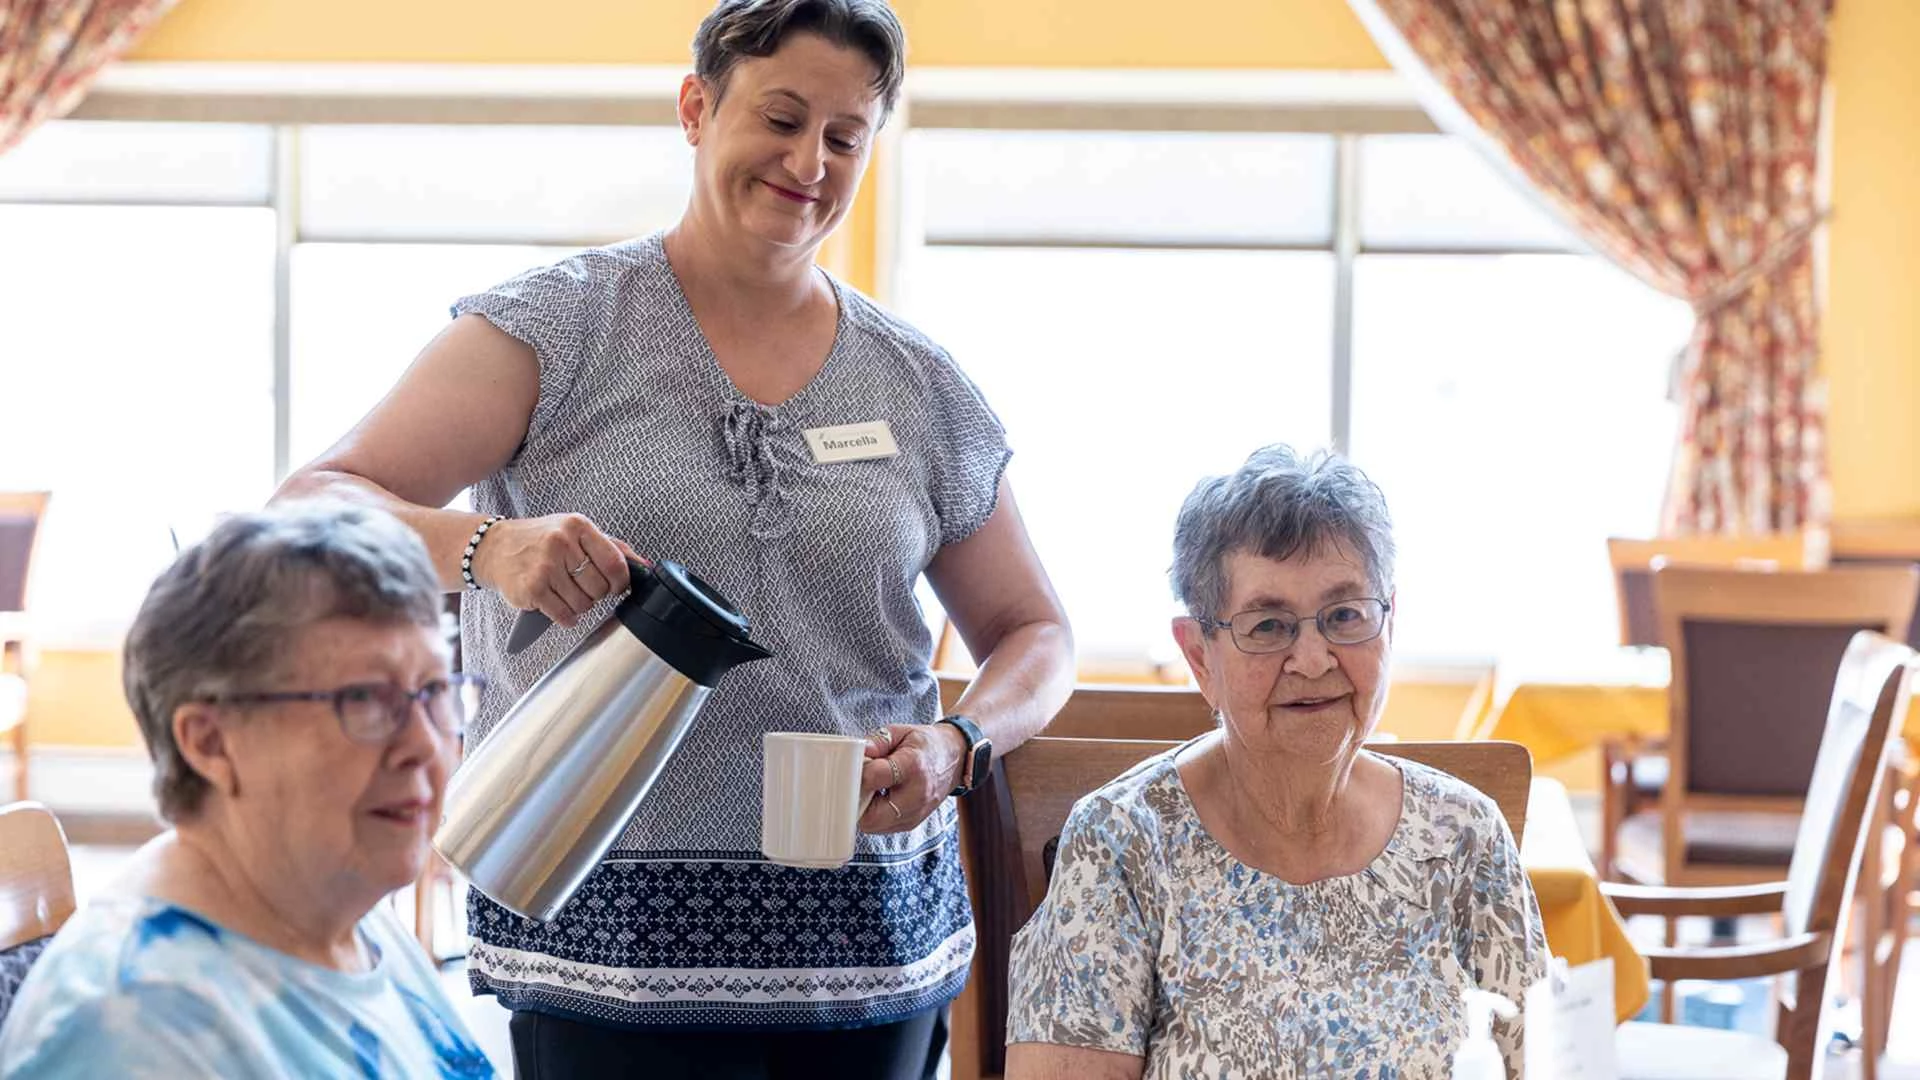 At the CV residence, a woman serves two old women coffee.